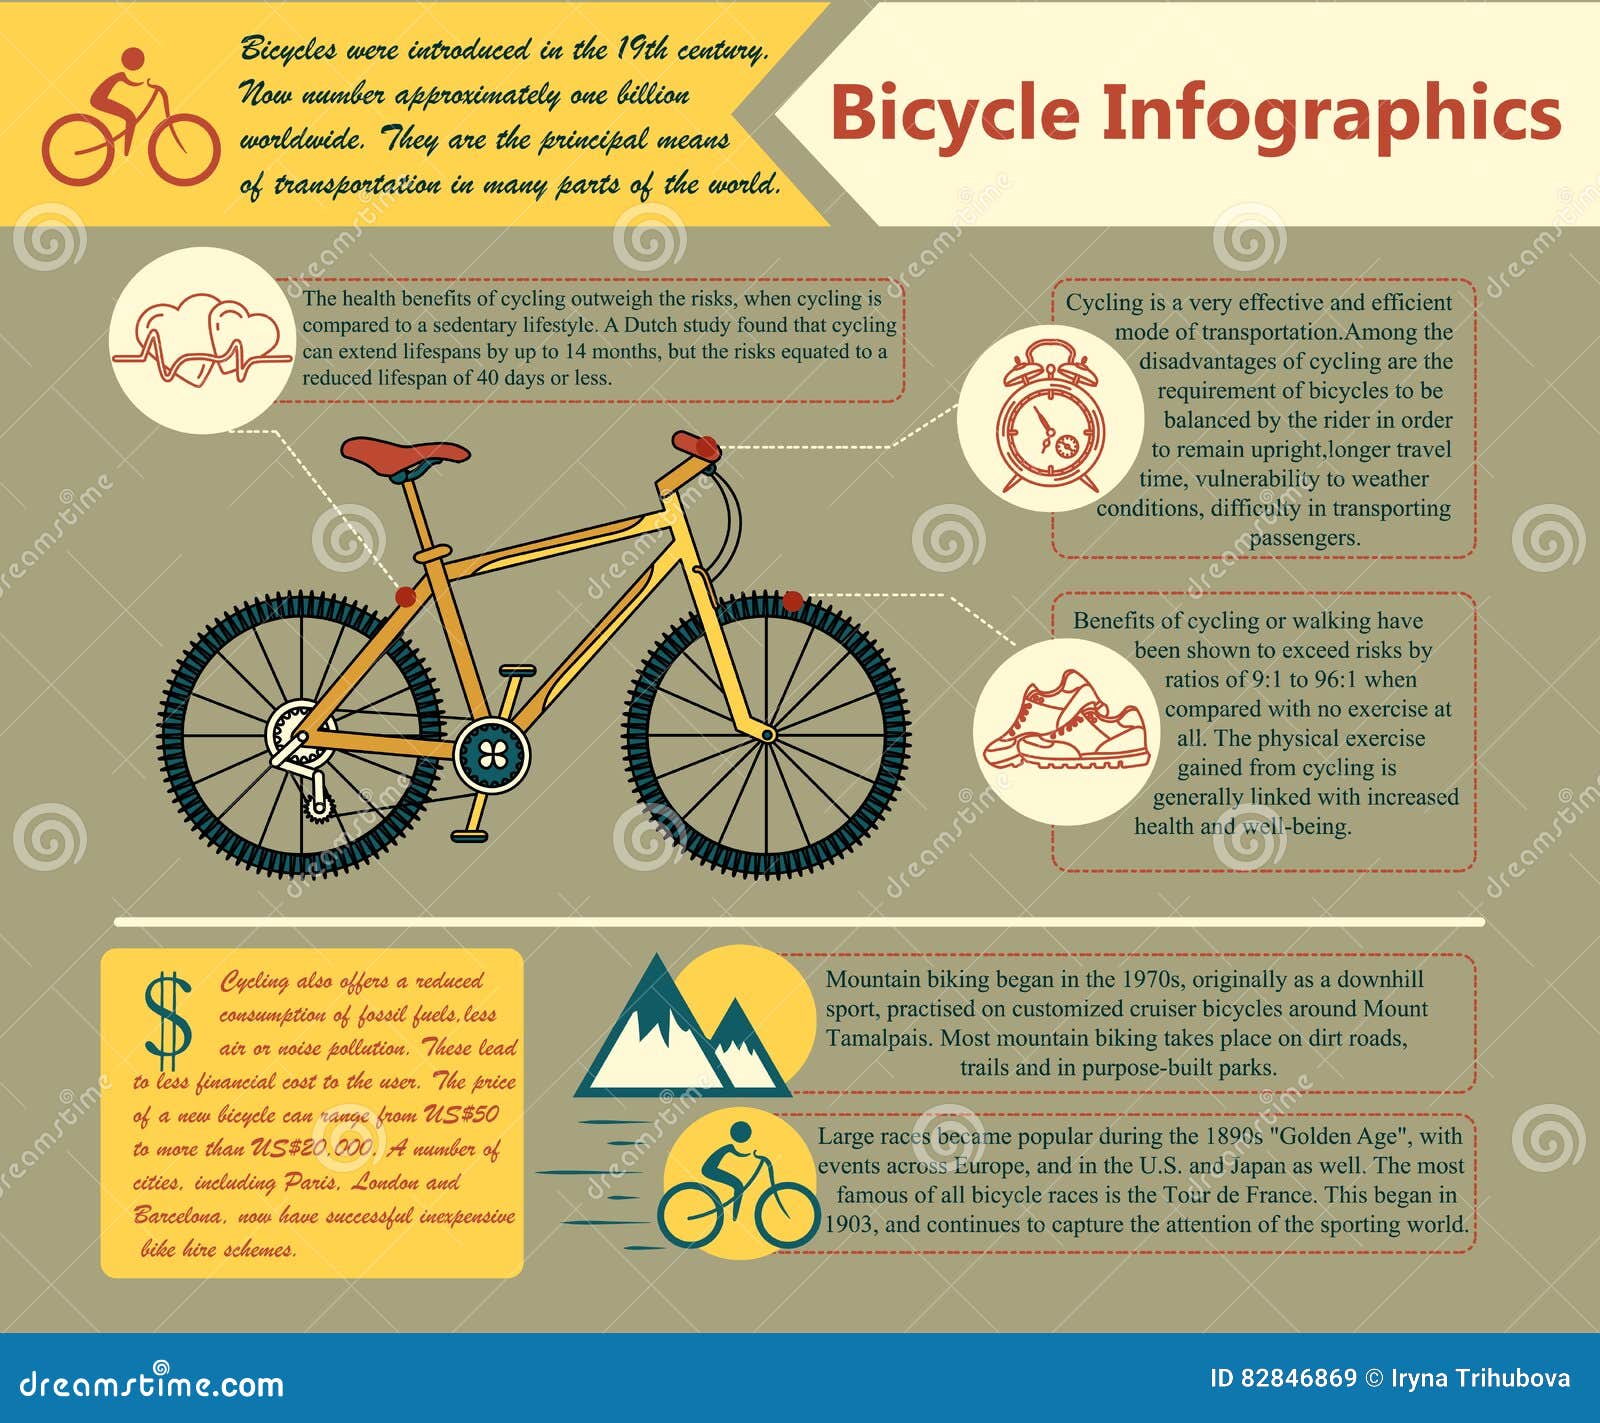 Bike Infographic Vector Illustration Stock Vector Image 82846869 within cycling benefits and disadvantages with regard to Household